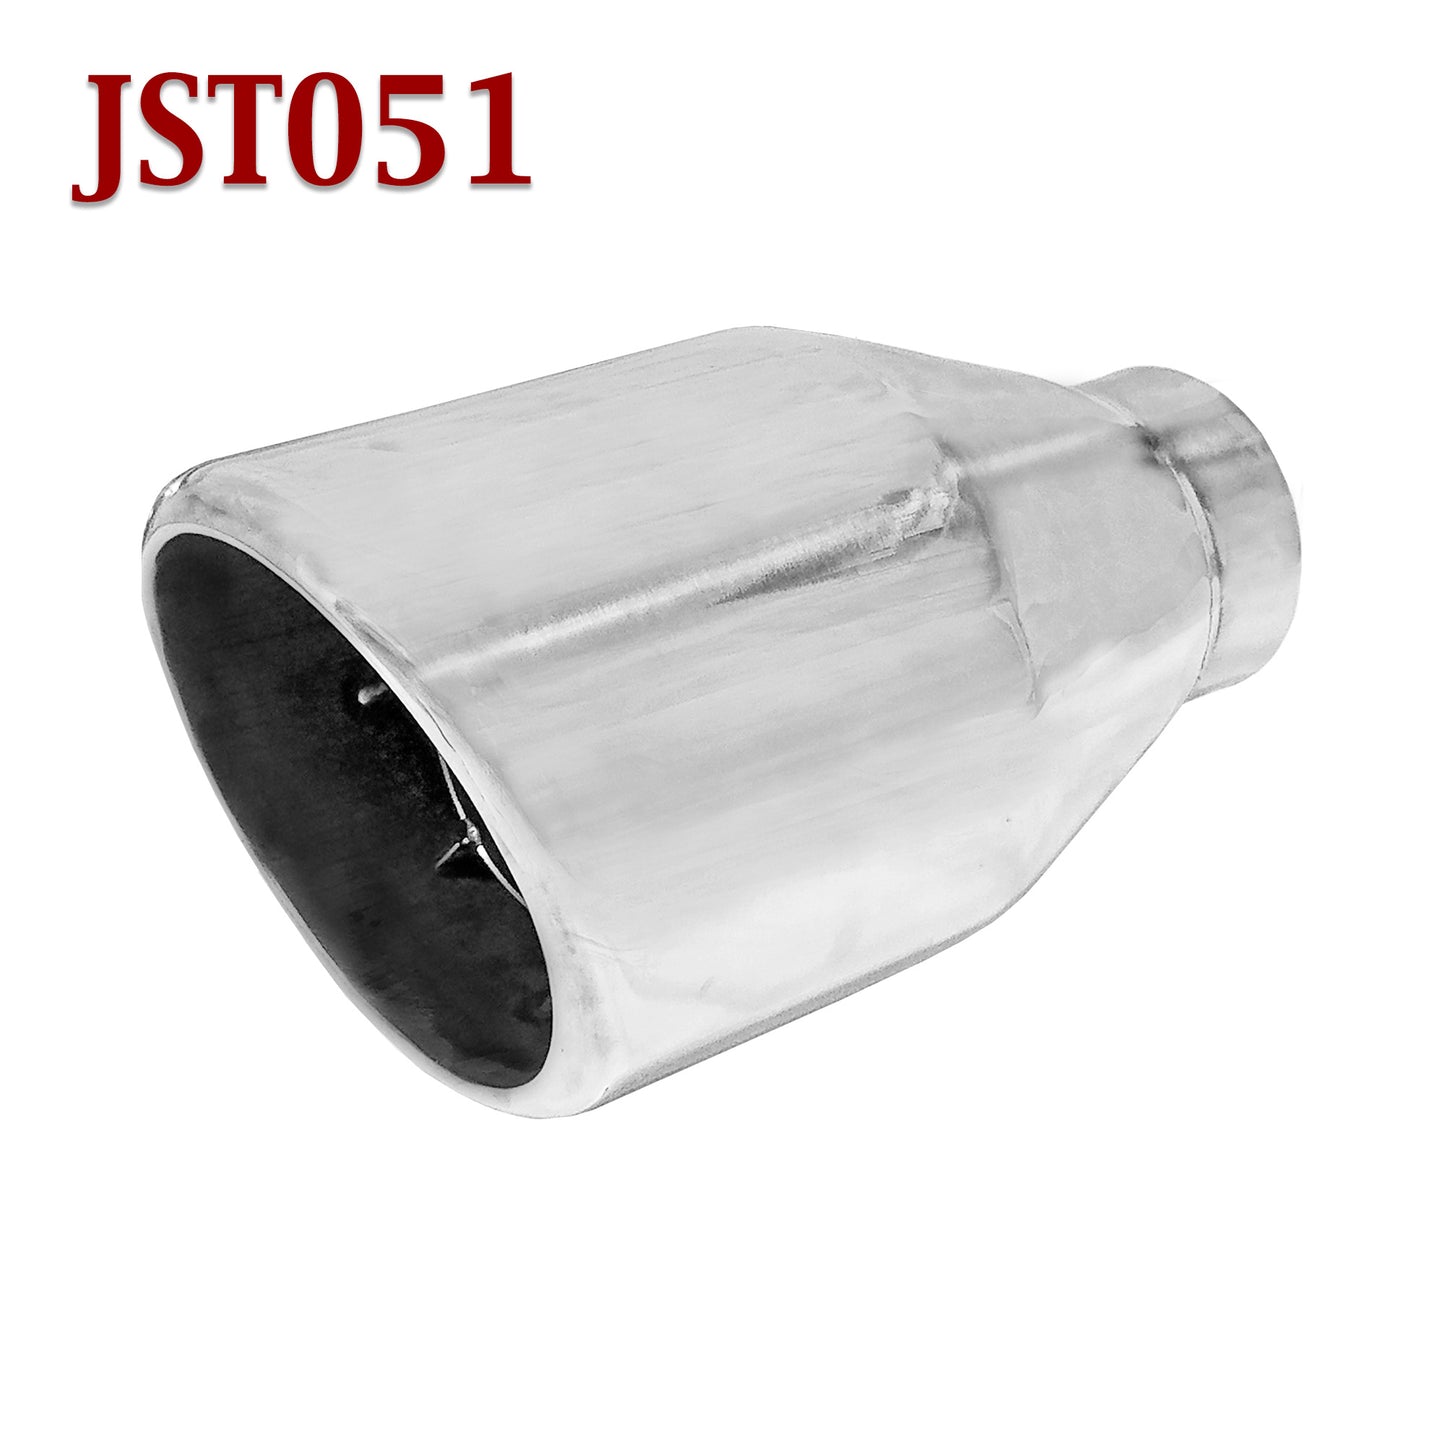 JST051 2.25" Stainless Round Exhaust Tip 2 1/4" Inlet 4 1/2" Outlet 8" Long